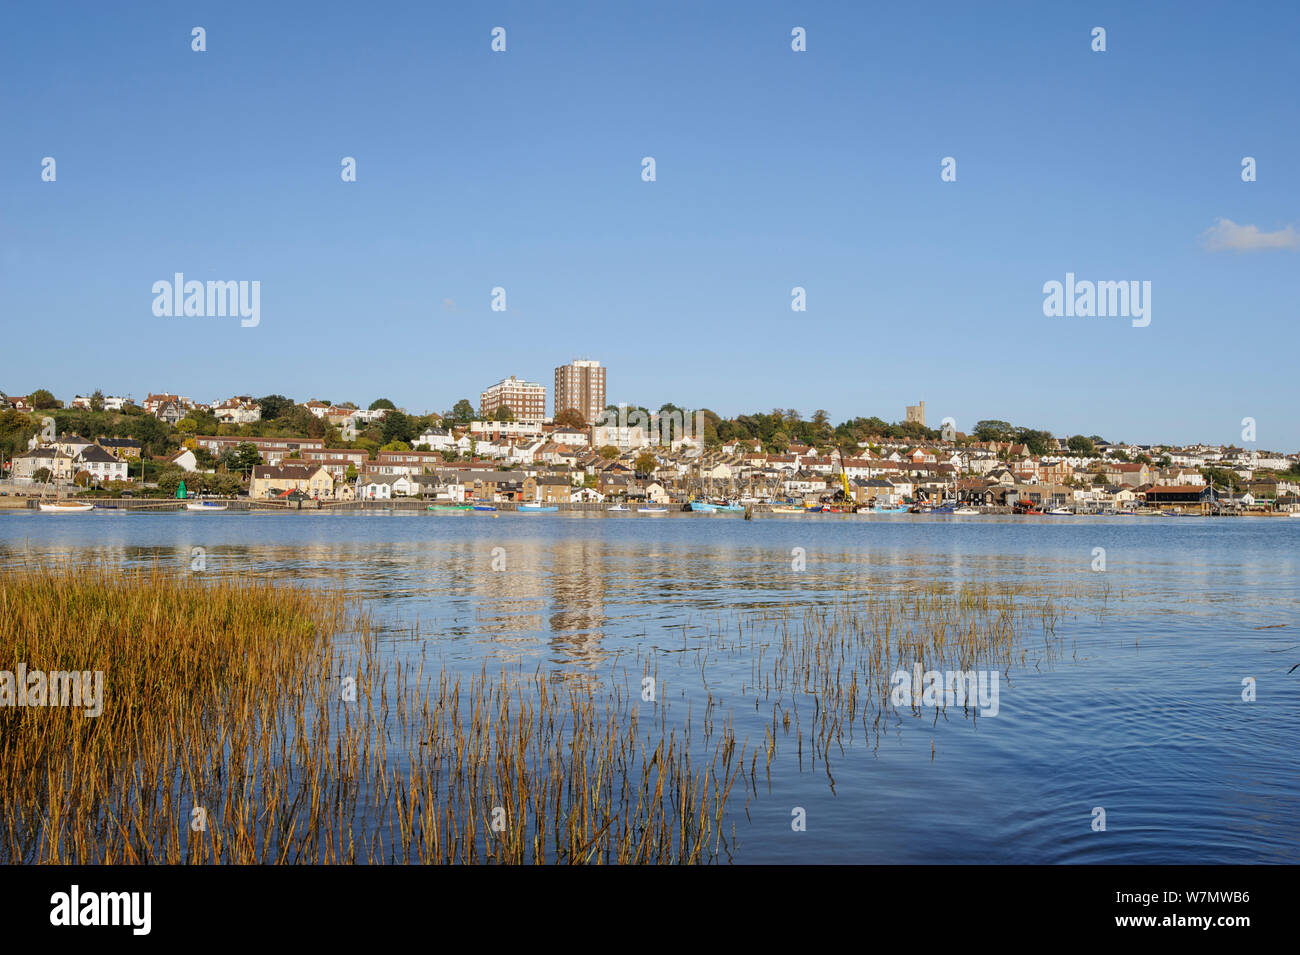 View from Two Tree Island looking towards Leigh-on-Sea, with saltmarsh vegetation in the foreground, Essex, England, UK, December Stock Photo